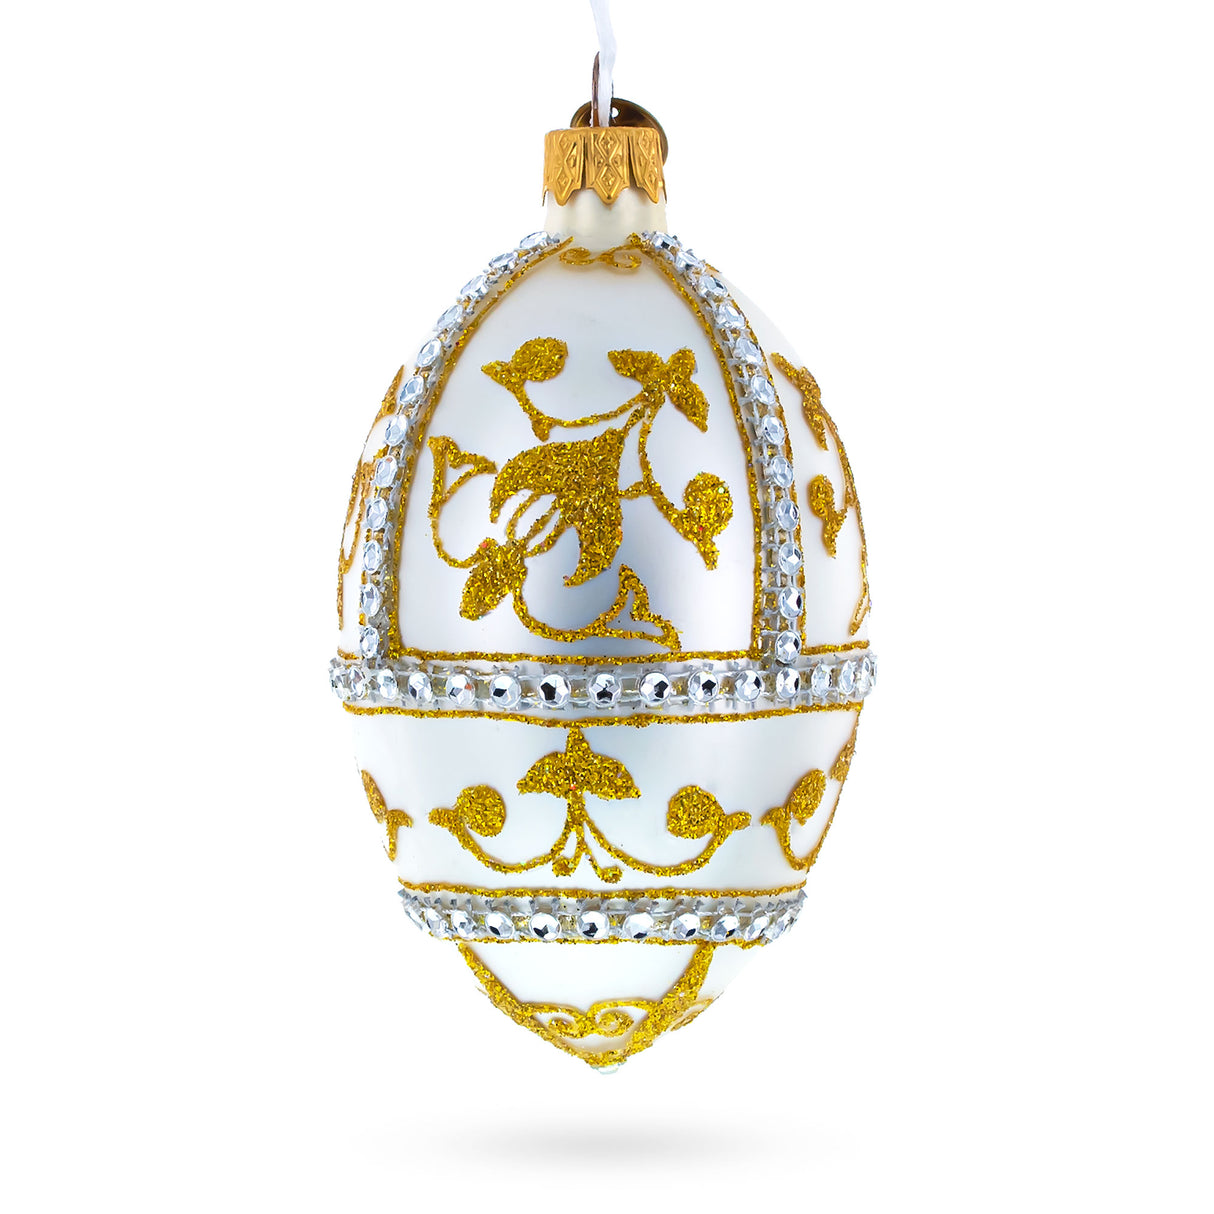 Jeweled Golden Chandelier on Silver Glass Egg Christmas Ornament 4 Inches in White color, Oval shape